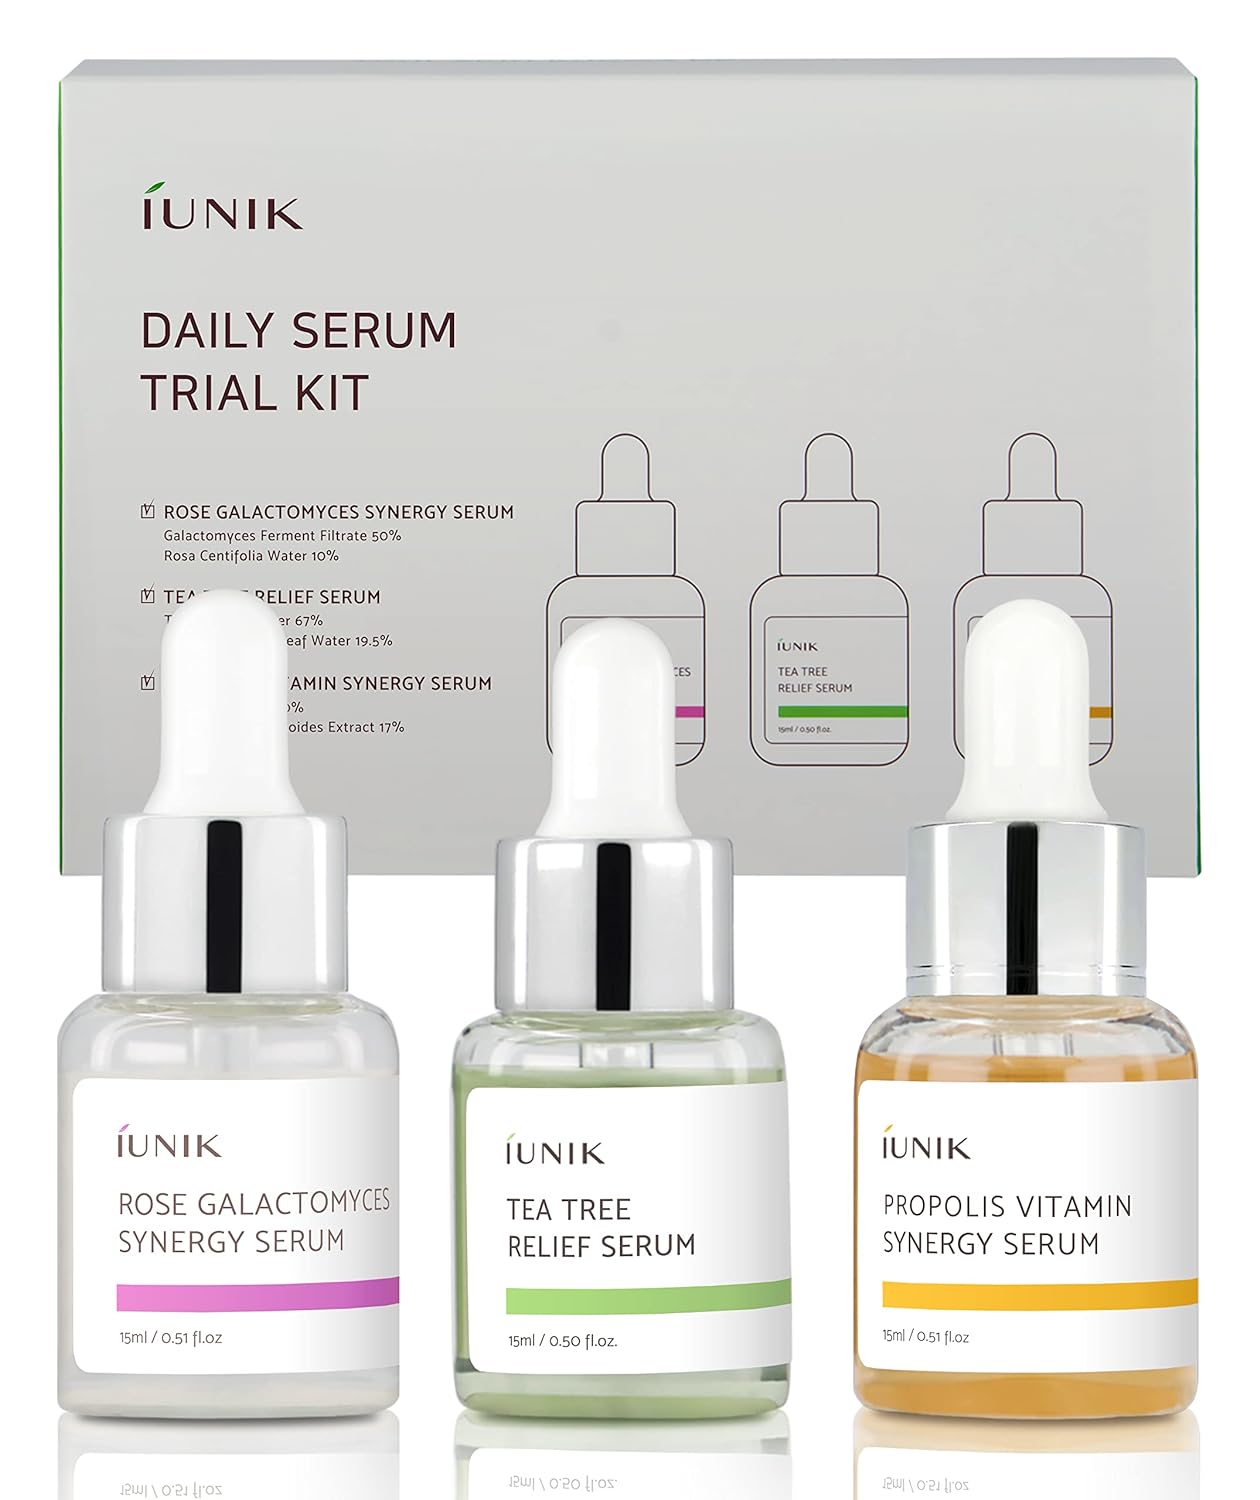 iUNIK Daily Serum Trial Kit (3x 0.51 ..) - Rose Galactomyces Synergy Serum, Tea Tree Relief Serum,Propolis Vitamin Synergy Serum, Great for Gifts, Trial, and Portability